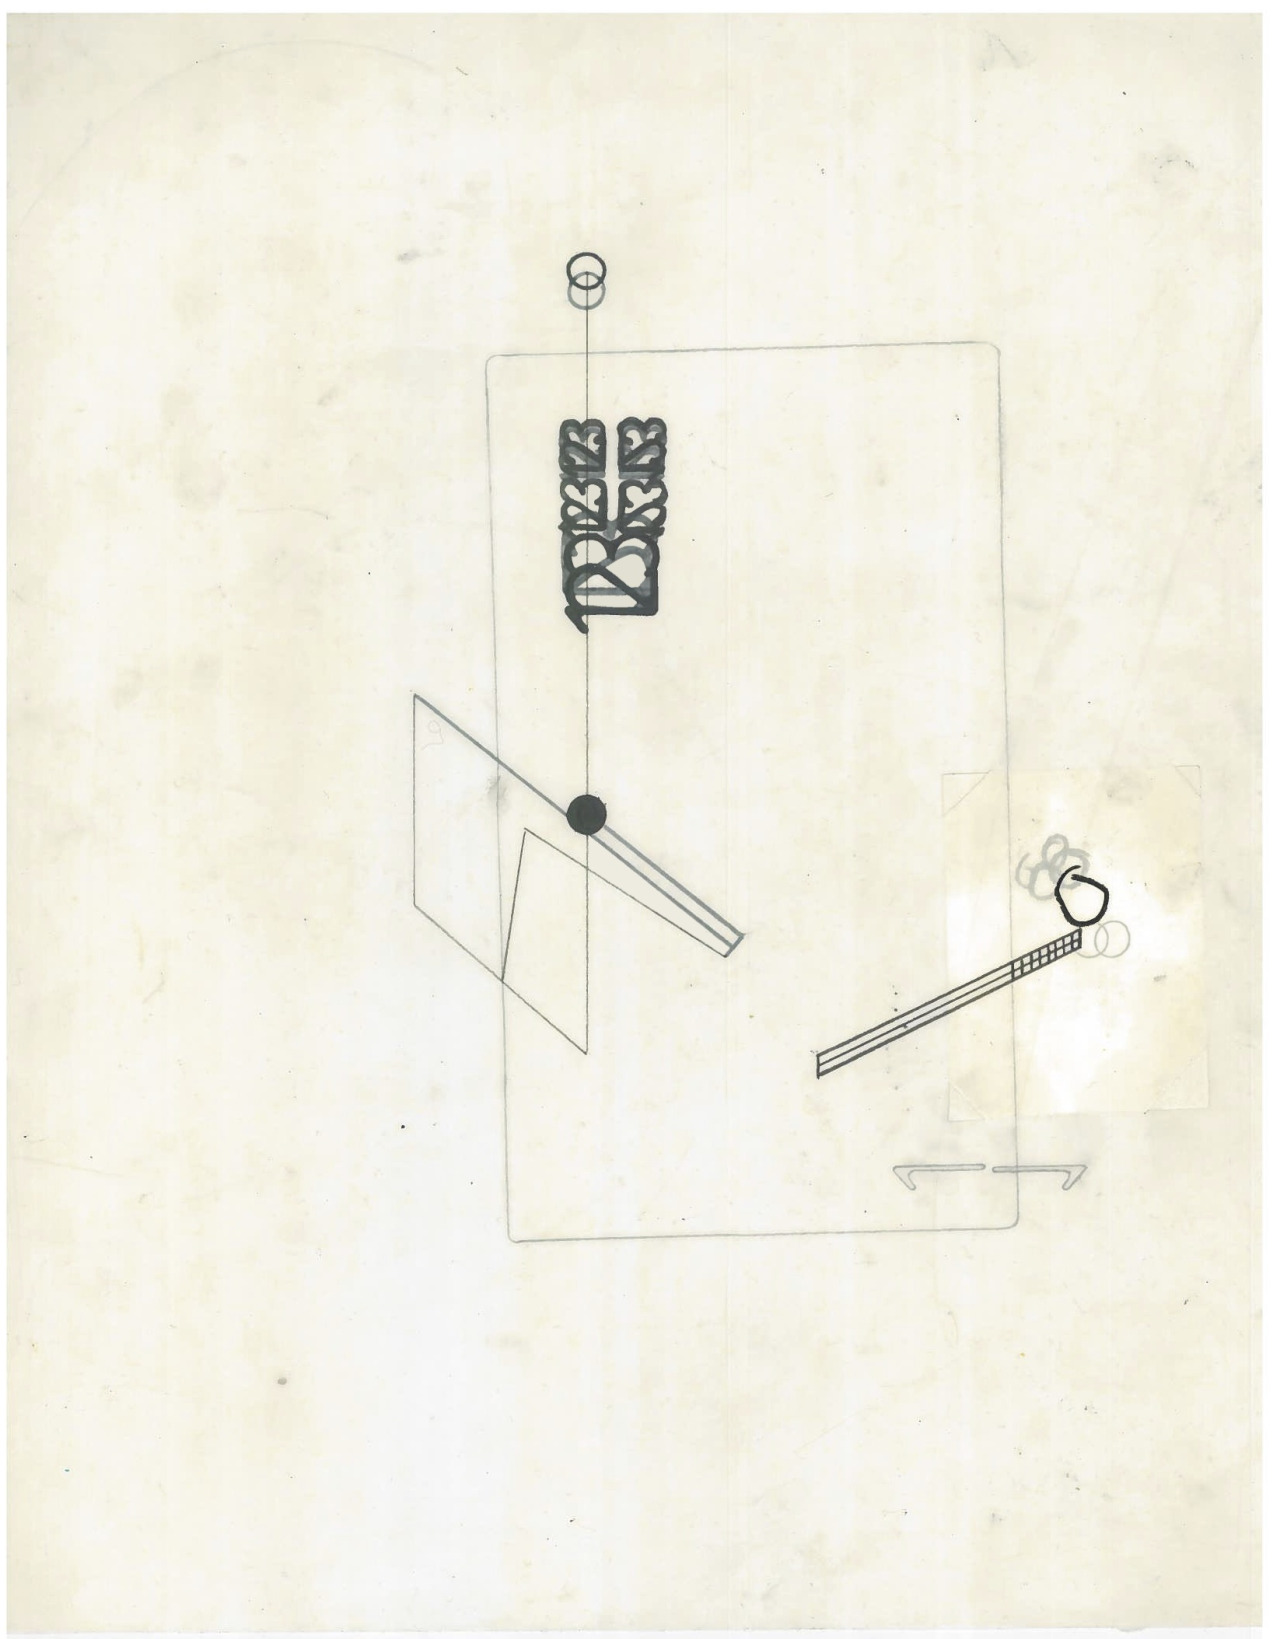 Untitled (the city, observations 19B)  Pencil and collage on layered oiled fabriano paper  279mm x 216mm  December 2013